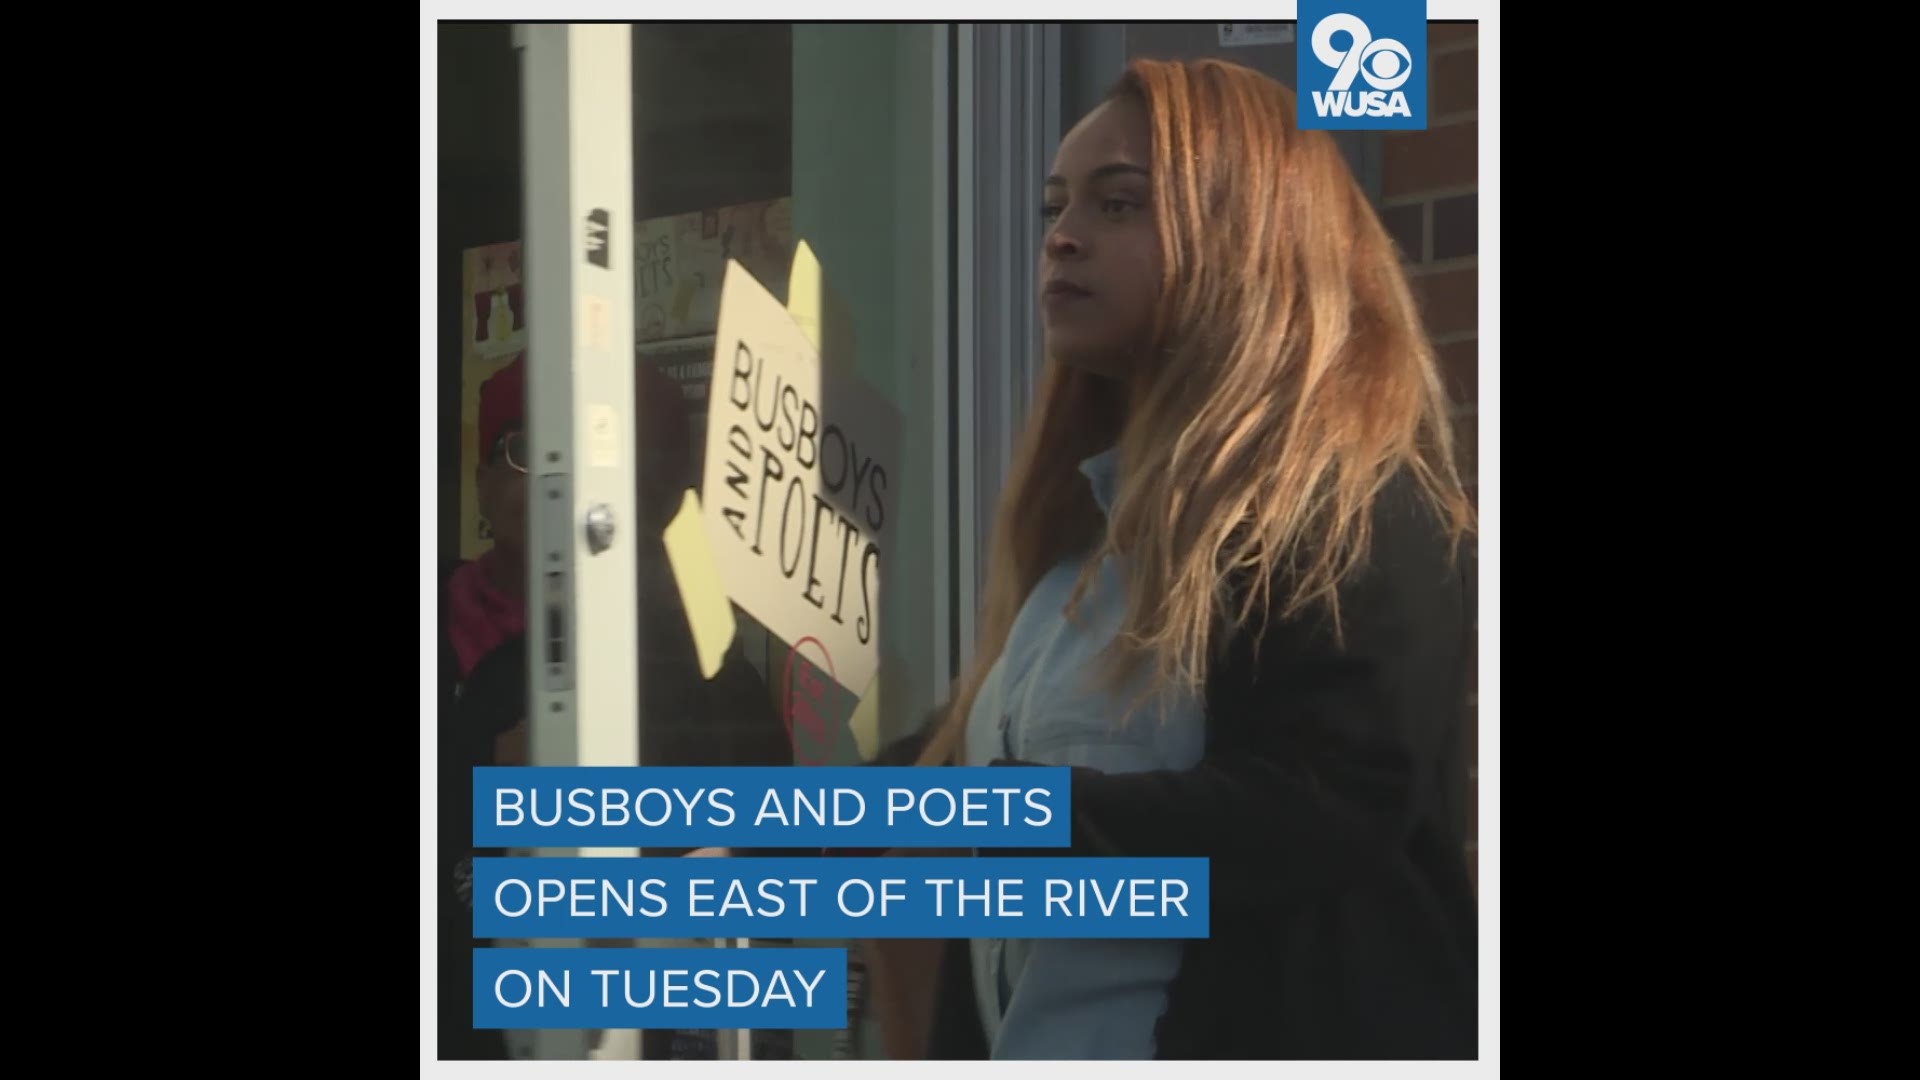 Busboys and Poets will open a location in Anacostia on Tuesday in Washington DC.